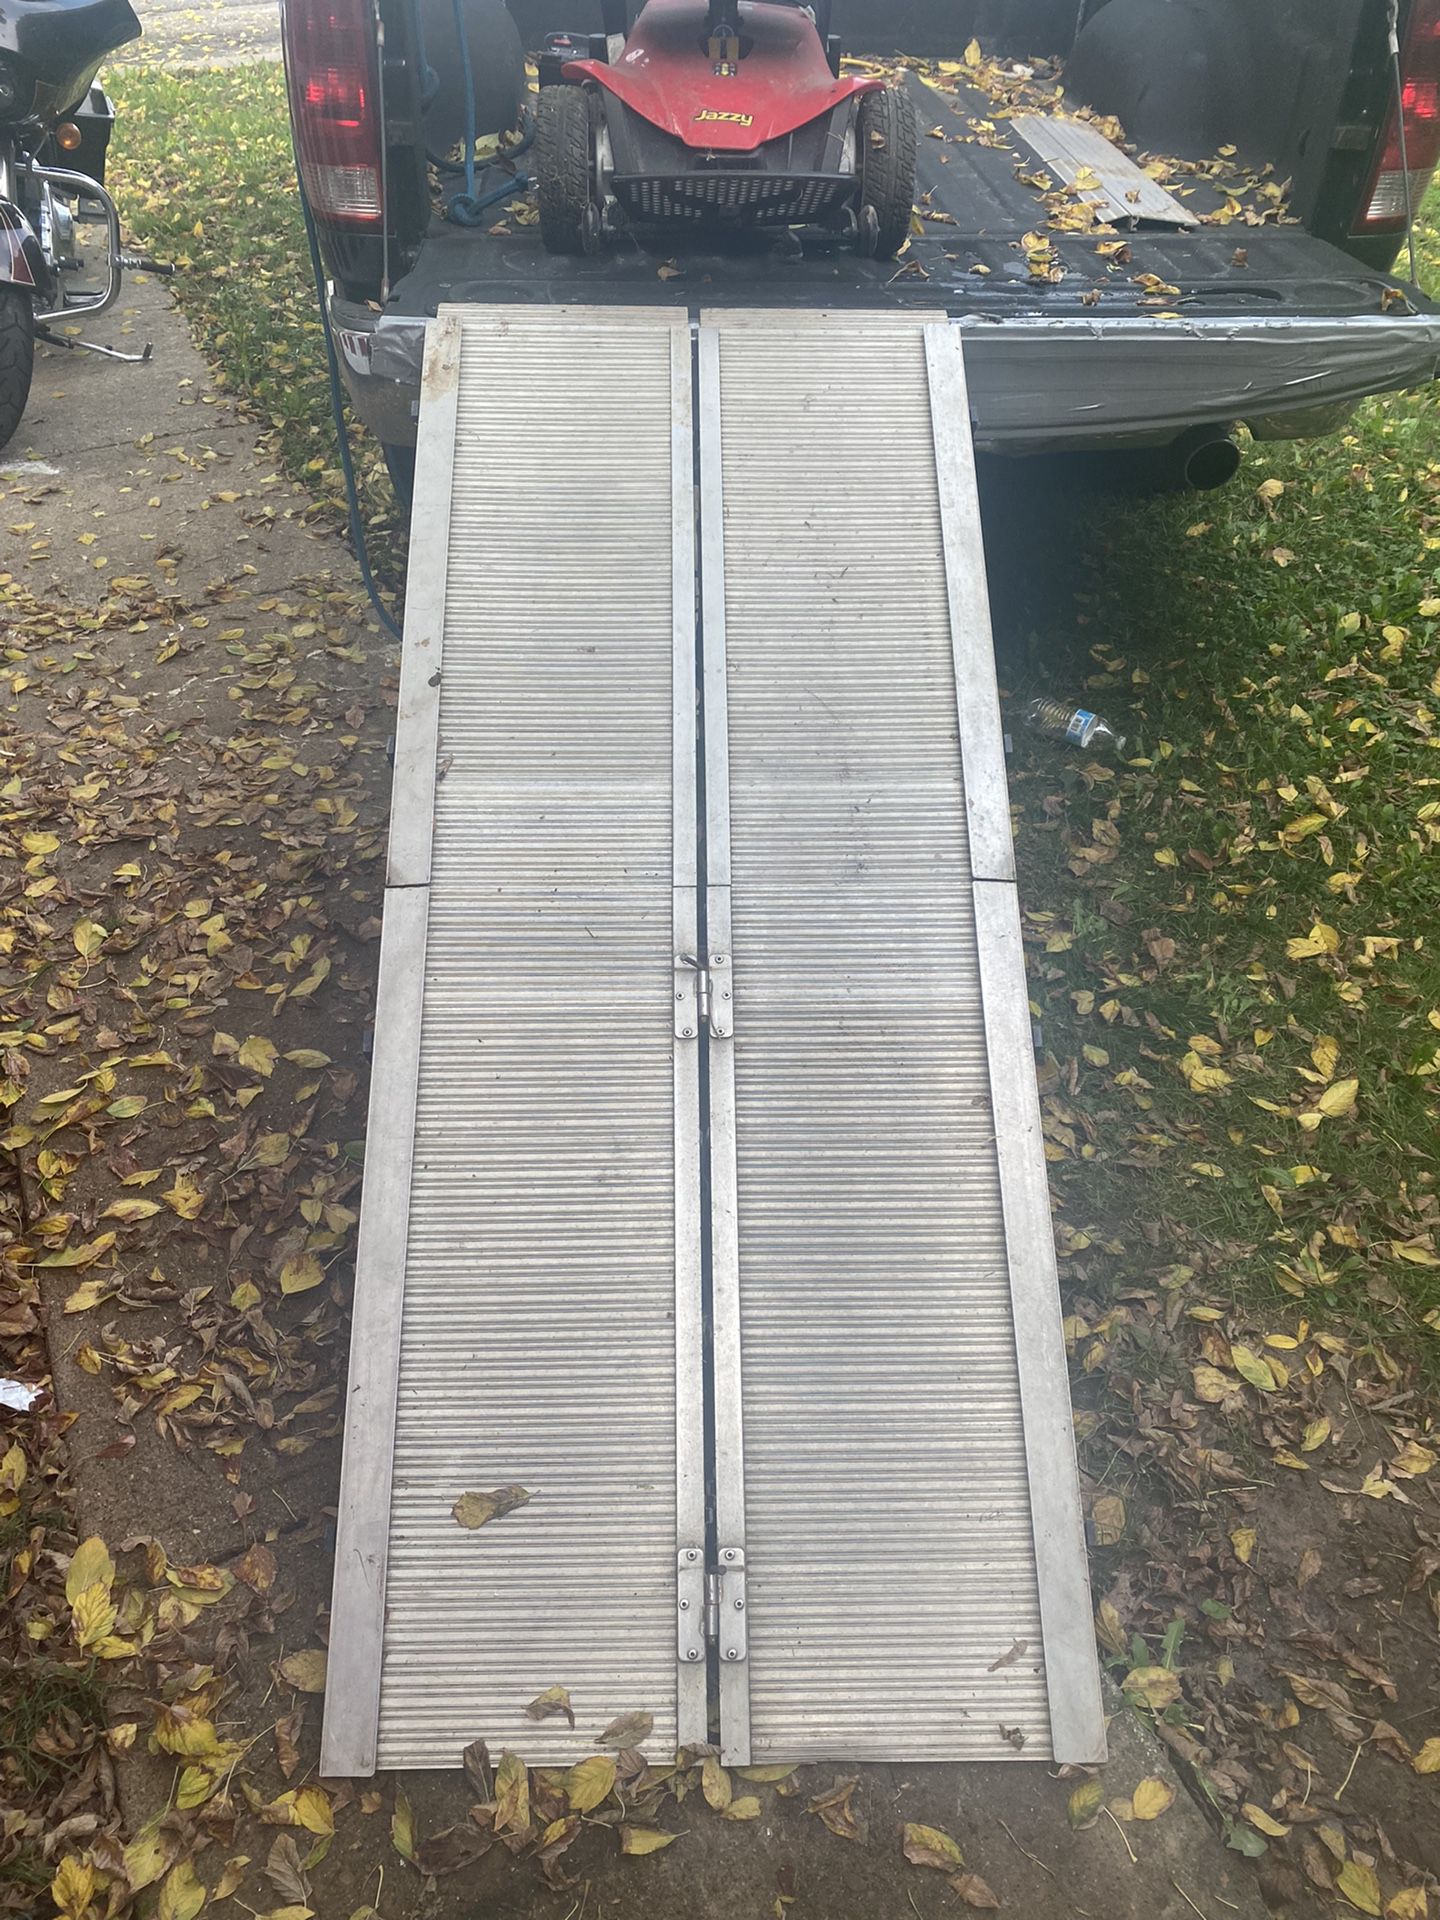 Jazzy Elite JS Electric Wheelchair And Ramp. Needs new batteries . 